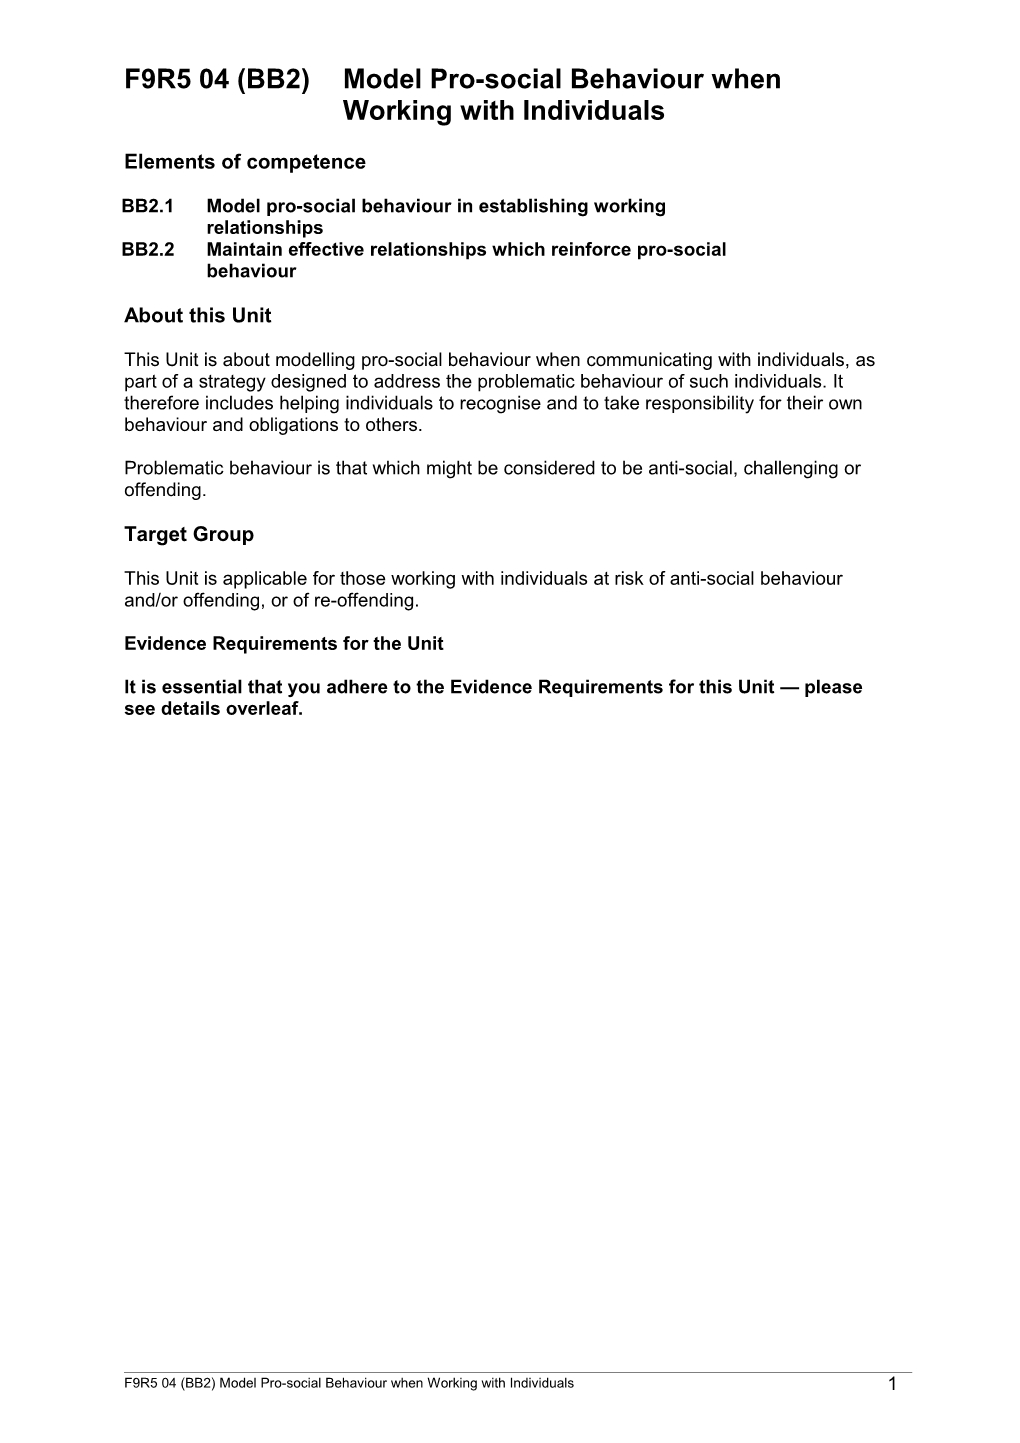 F9R5 04 (BB2)Model Pro-Social Behaviour When Working with Individuals